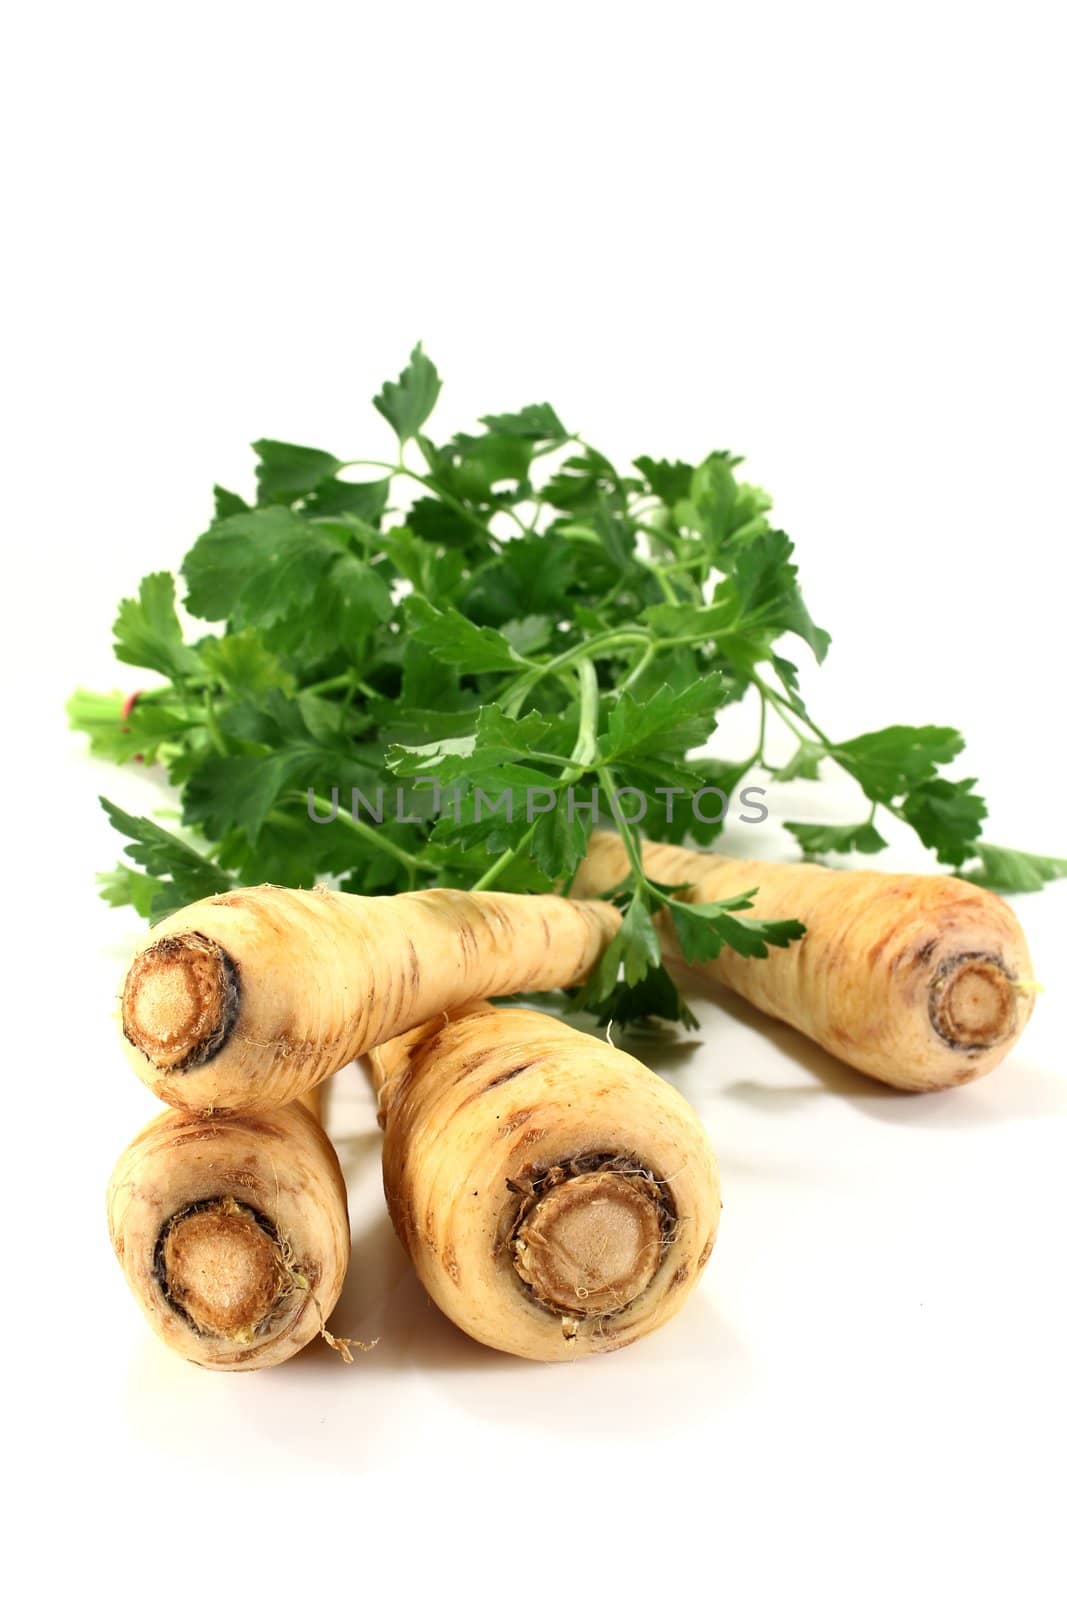 Parsnip and parsley on a white background